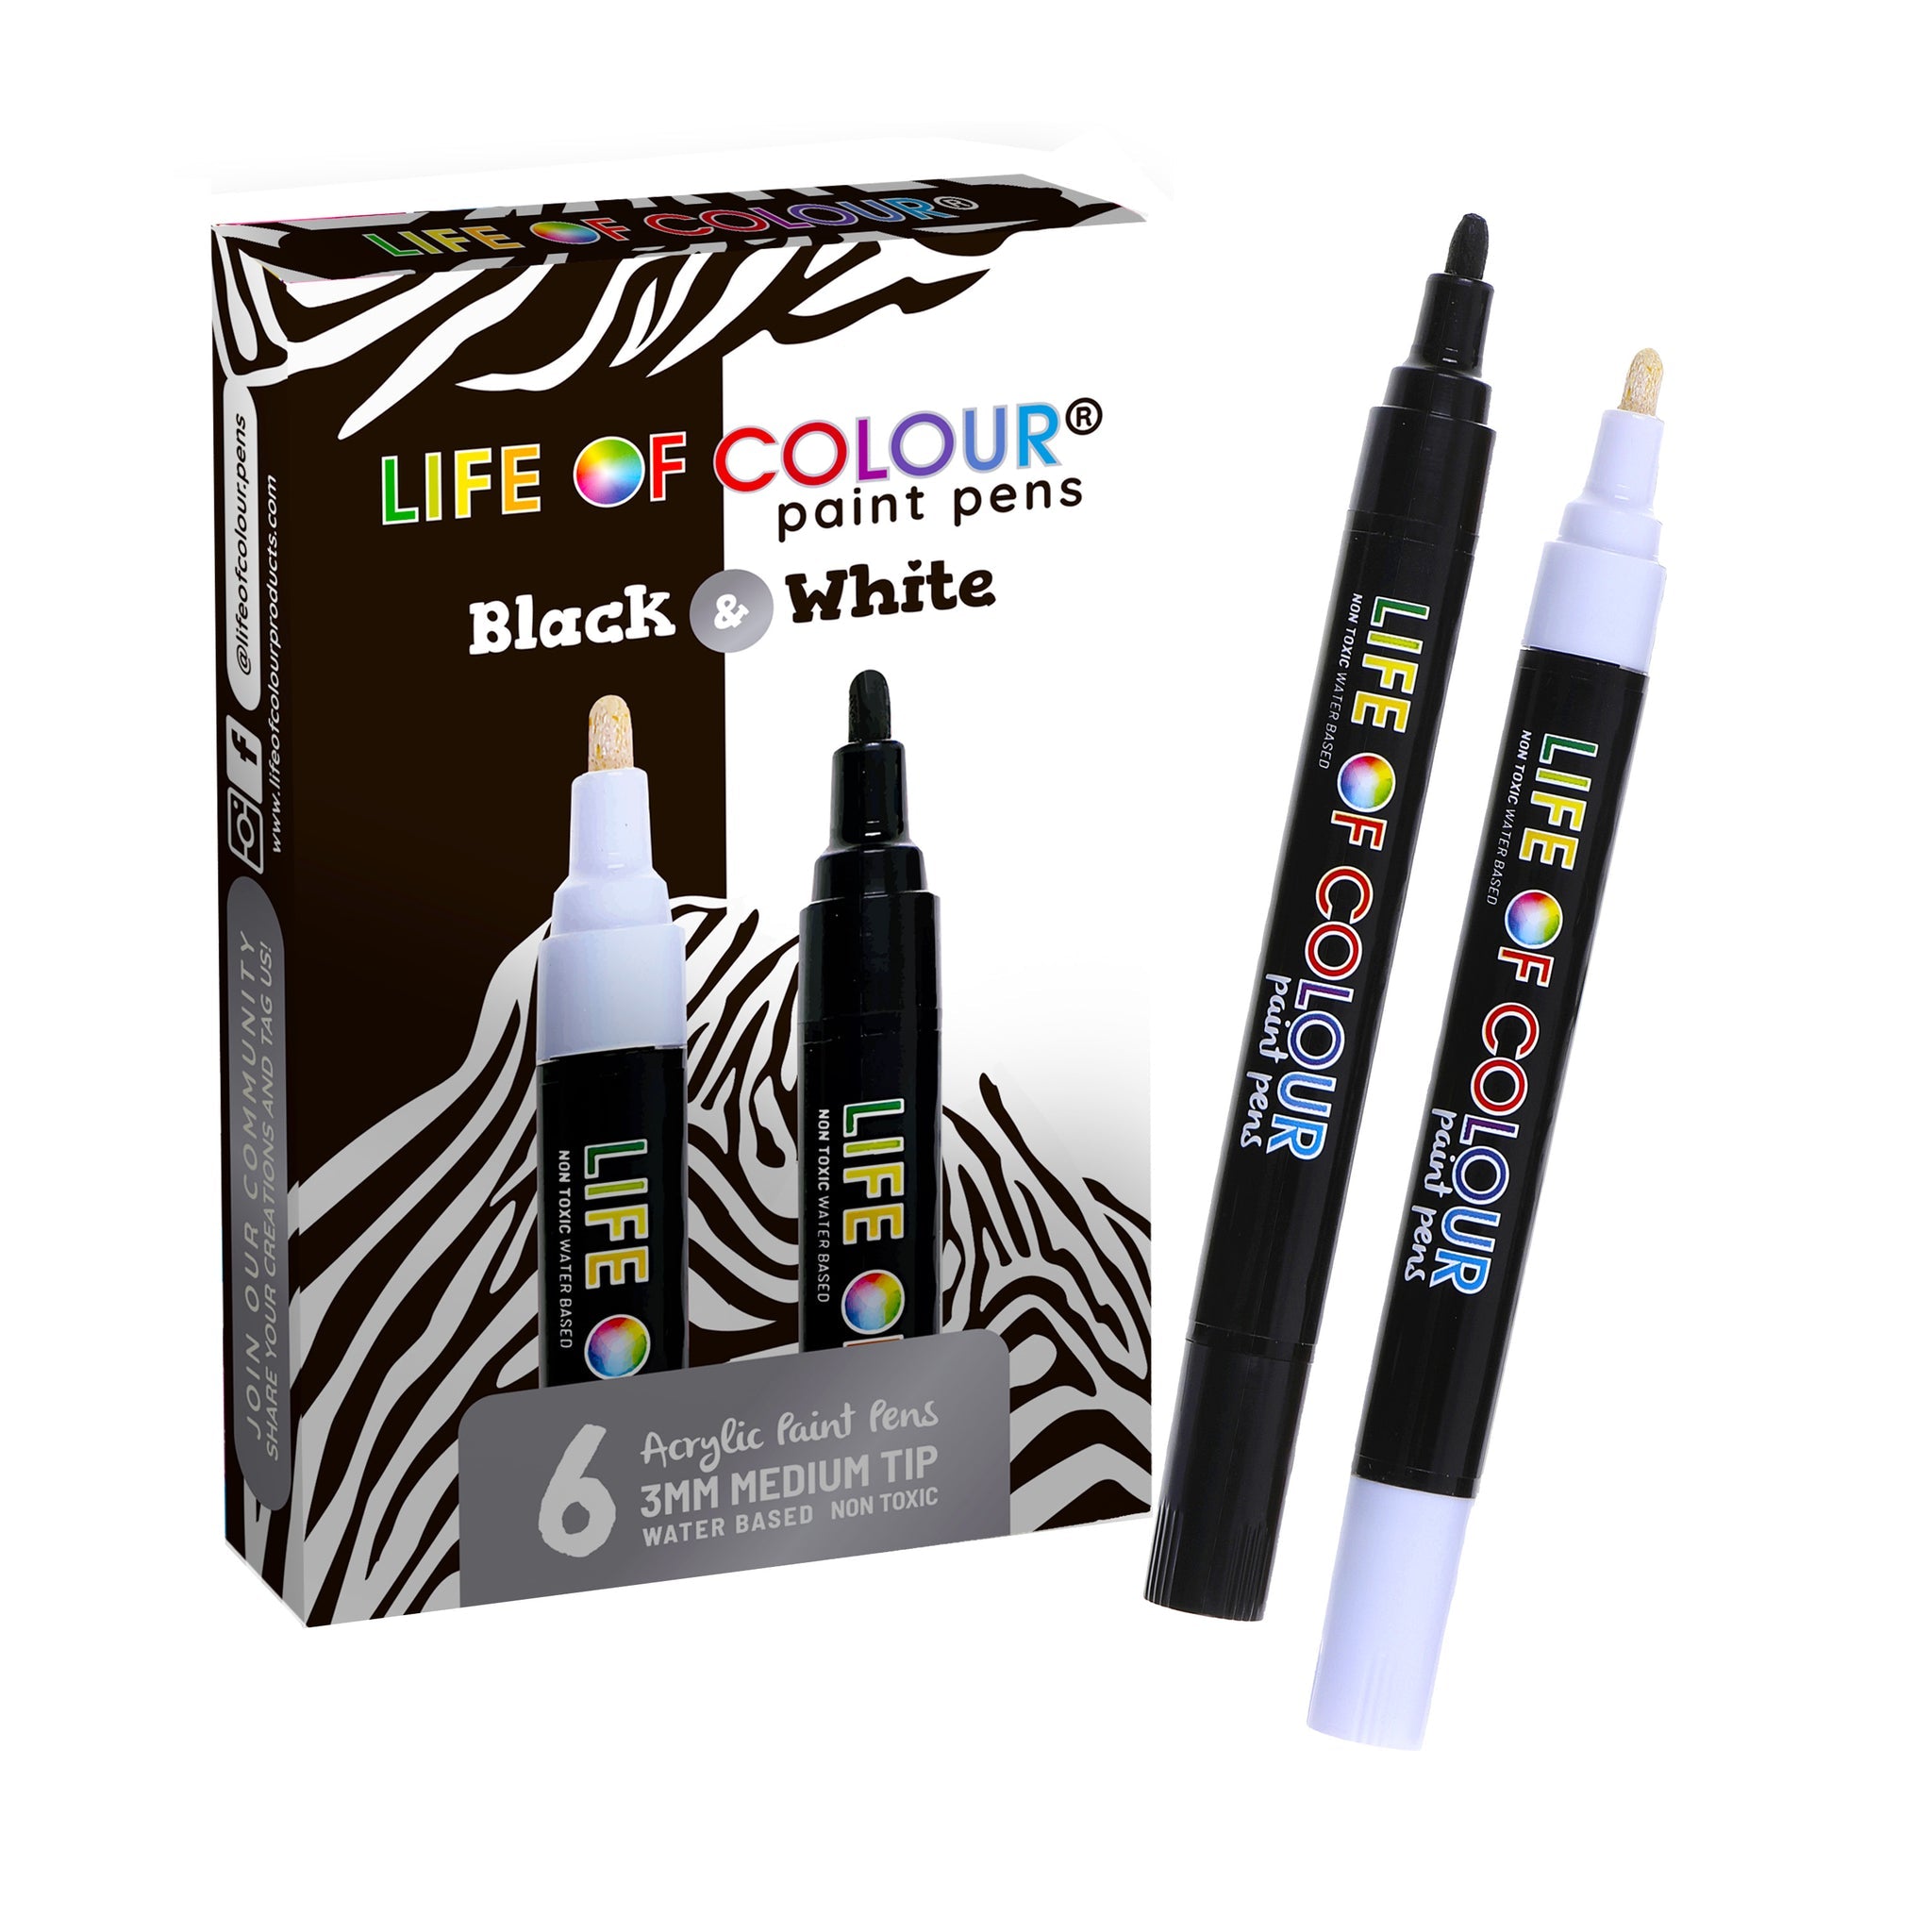 Life of Colour Paint Pens Black and White